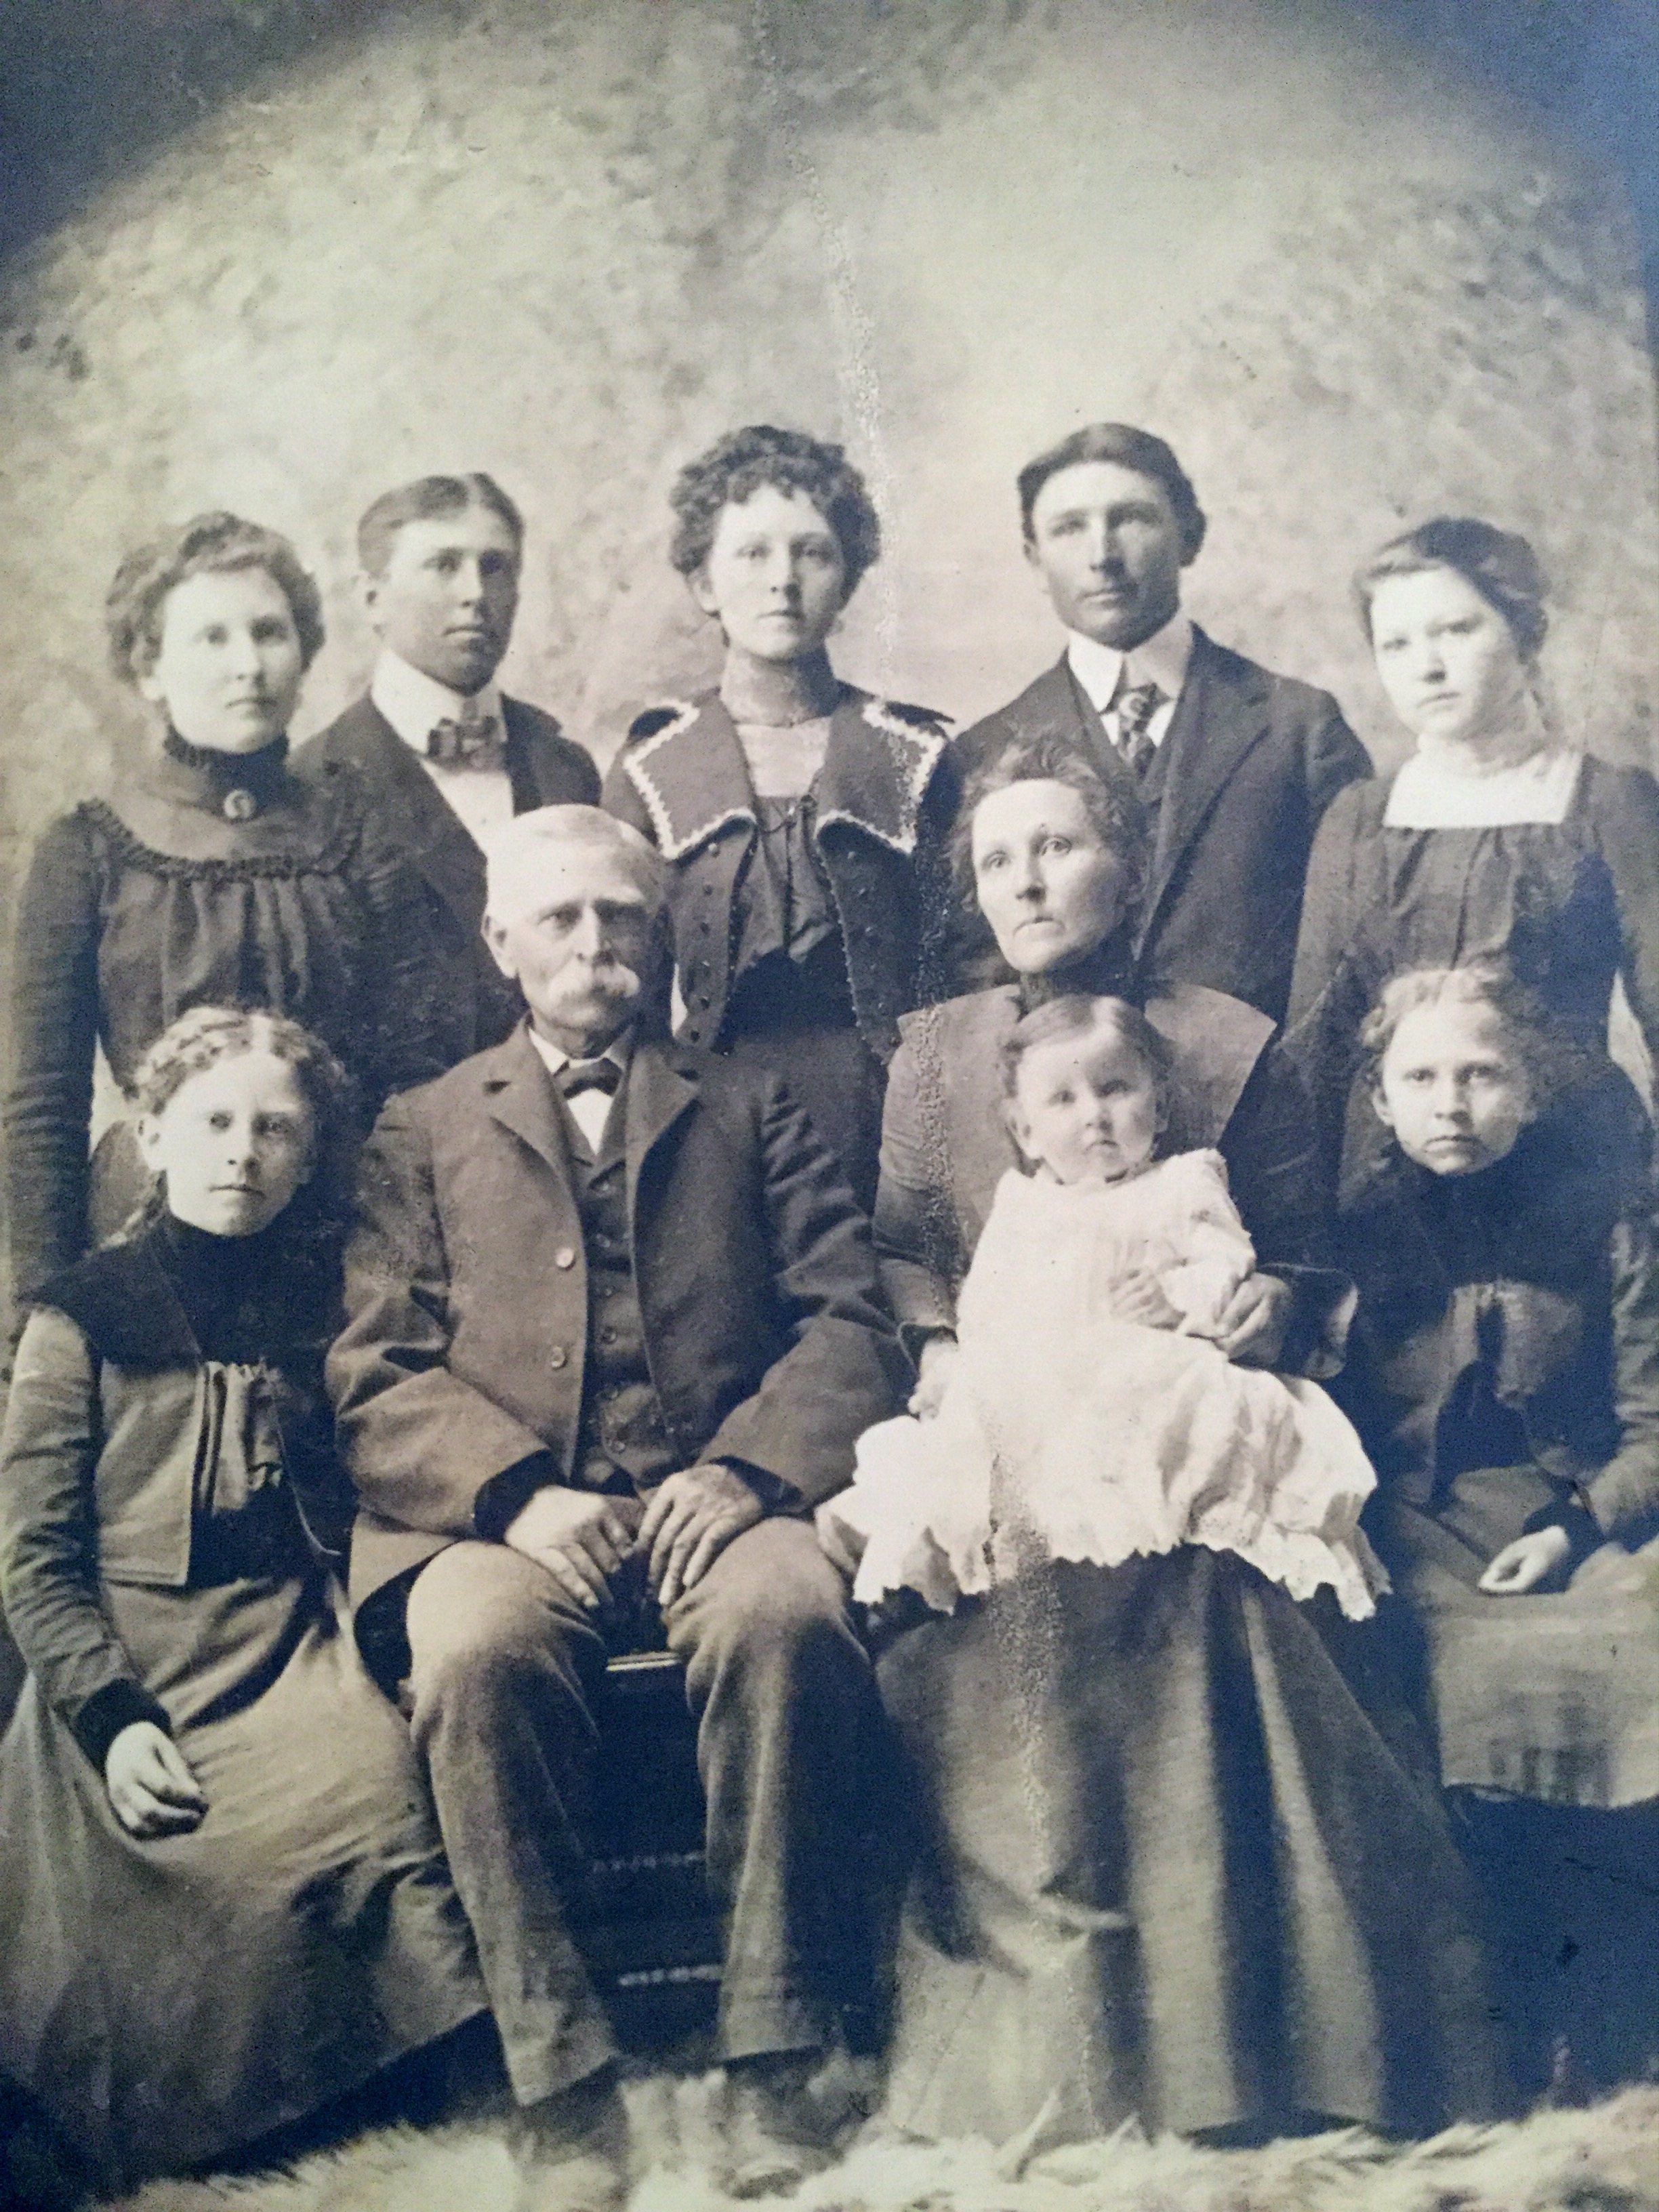 The John O. Gibby and Laura H. Taylor Gibby Family.  Back row, l to r:  Olive May Gibby (August 25, 1881-December 2, 1966), Thomas William Gibby (February 18, 1879-July 28, 1937), Lottie Jane Gibby (August 29, 1884-August 7, 1979), George Franklin Gibby (February 12, 1878-May 23, 1965) and Eva Gibby (July 20, 1886-December 18, 1979).
Second row, l to r:  Gladys Marie Gibby (October 7, 1888-February 26, 1977),  John Owens Gibby (April 29, 1841-April 2, 1926), Laura Henrietta Taylor Gibby (February 18, 1859-November 21, 1943) holding Murrell Earnest Gibby (March 25, 1900-May 5, 1961), and Lillian Gibby (July 17, 1890-October 18, 1987).  